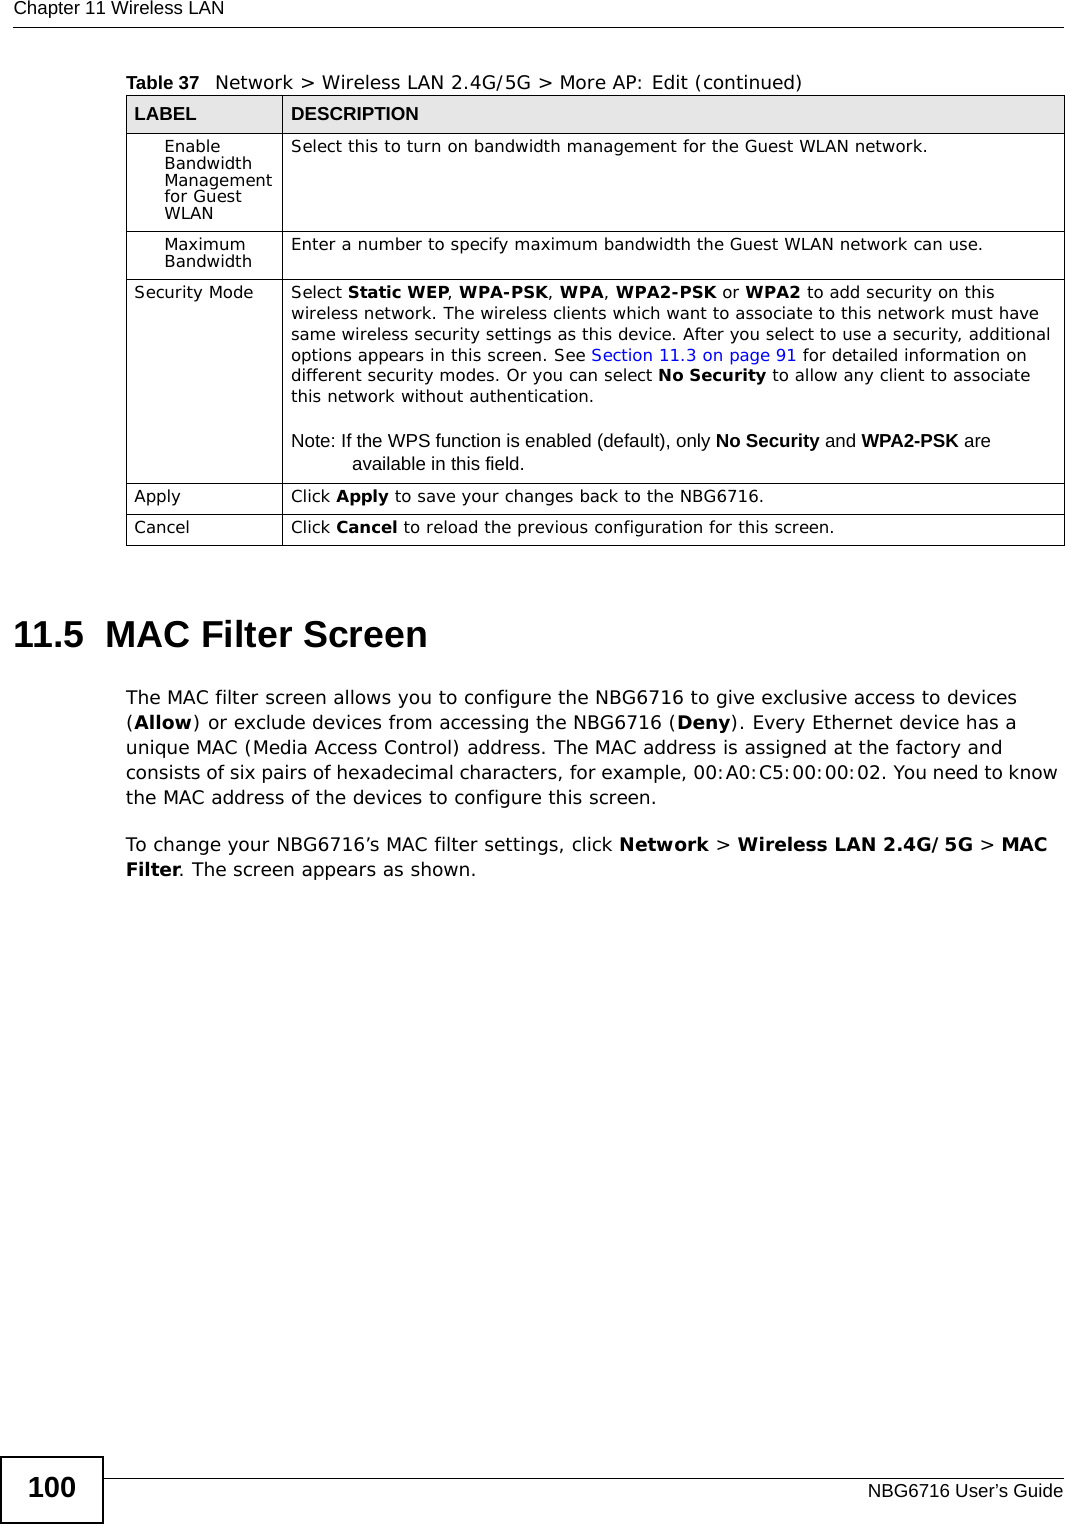 Chapter 11 Wireless LANNBG6716 User’s Guide10011.5  MAC Filter Screen The MAC filter screen allows you to configure the NBG6716 to give exclusive access to devices (Allow) or exclude devices from accessing the NBG6716 (Deny). Every Ethernet device has a unique MAC (Media Access Control) address. The MAC address is assigned at the factory and consists of six pairs of hexadecimal characters, for example, 00:A0:C5:00:00:02. You need to know the MAC address of the devices to configure this screen.To change your NBG6716’s MAC filter settings, click Network &gt; Wireless LAN 2.4G/5G &gt; MAC Filter. The screen appears as shown.Enable Bandwidth Management for Guest WLAN Select this to turn on bandwidth management for the Guest WLAN network.Maximum Bandwidth  Enter a number to specify maximum bandwidth the Guest WLAN network can use.Security Mode Select Static WEP, WPA-PSK, WPA, WPA2-PSK or WPA2 to add security on this wireless network. The wireless clients which want to associate to this network must have same wireless security settings as this device. After you select to use a security, additional options appears in this screen. See Section 11.3 on page 91 for detailed information on different security modes. Or you can select No Security to allow any client to associate this network without authentication.Note: If the WPS function is enabled (default), only No Security and WPA2-PSK are available in this field.Apply Click Apply to save your changes back to the NBG6716.Cancel Click Cancel to reload the previous configuration for this screen.Table 37   Network &gt; Wireless LAN 2.4G/5G &gt; More AP: Edit (continued)LABEL DESCRIPTION